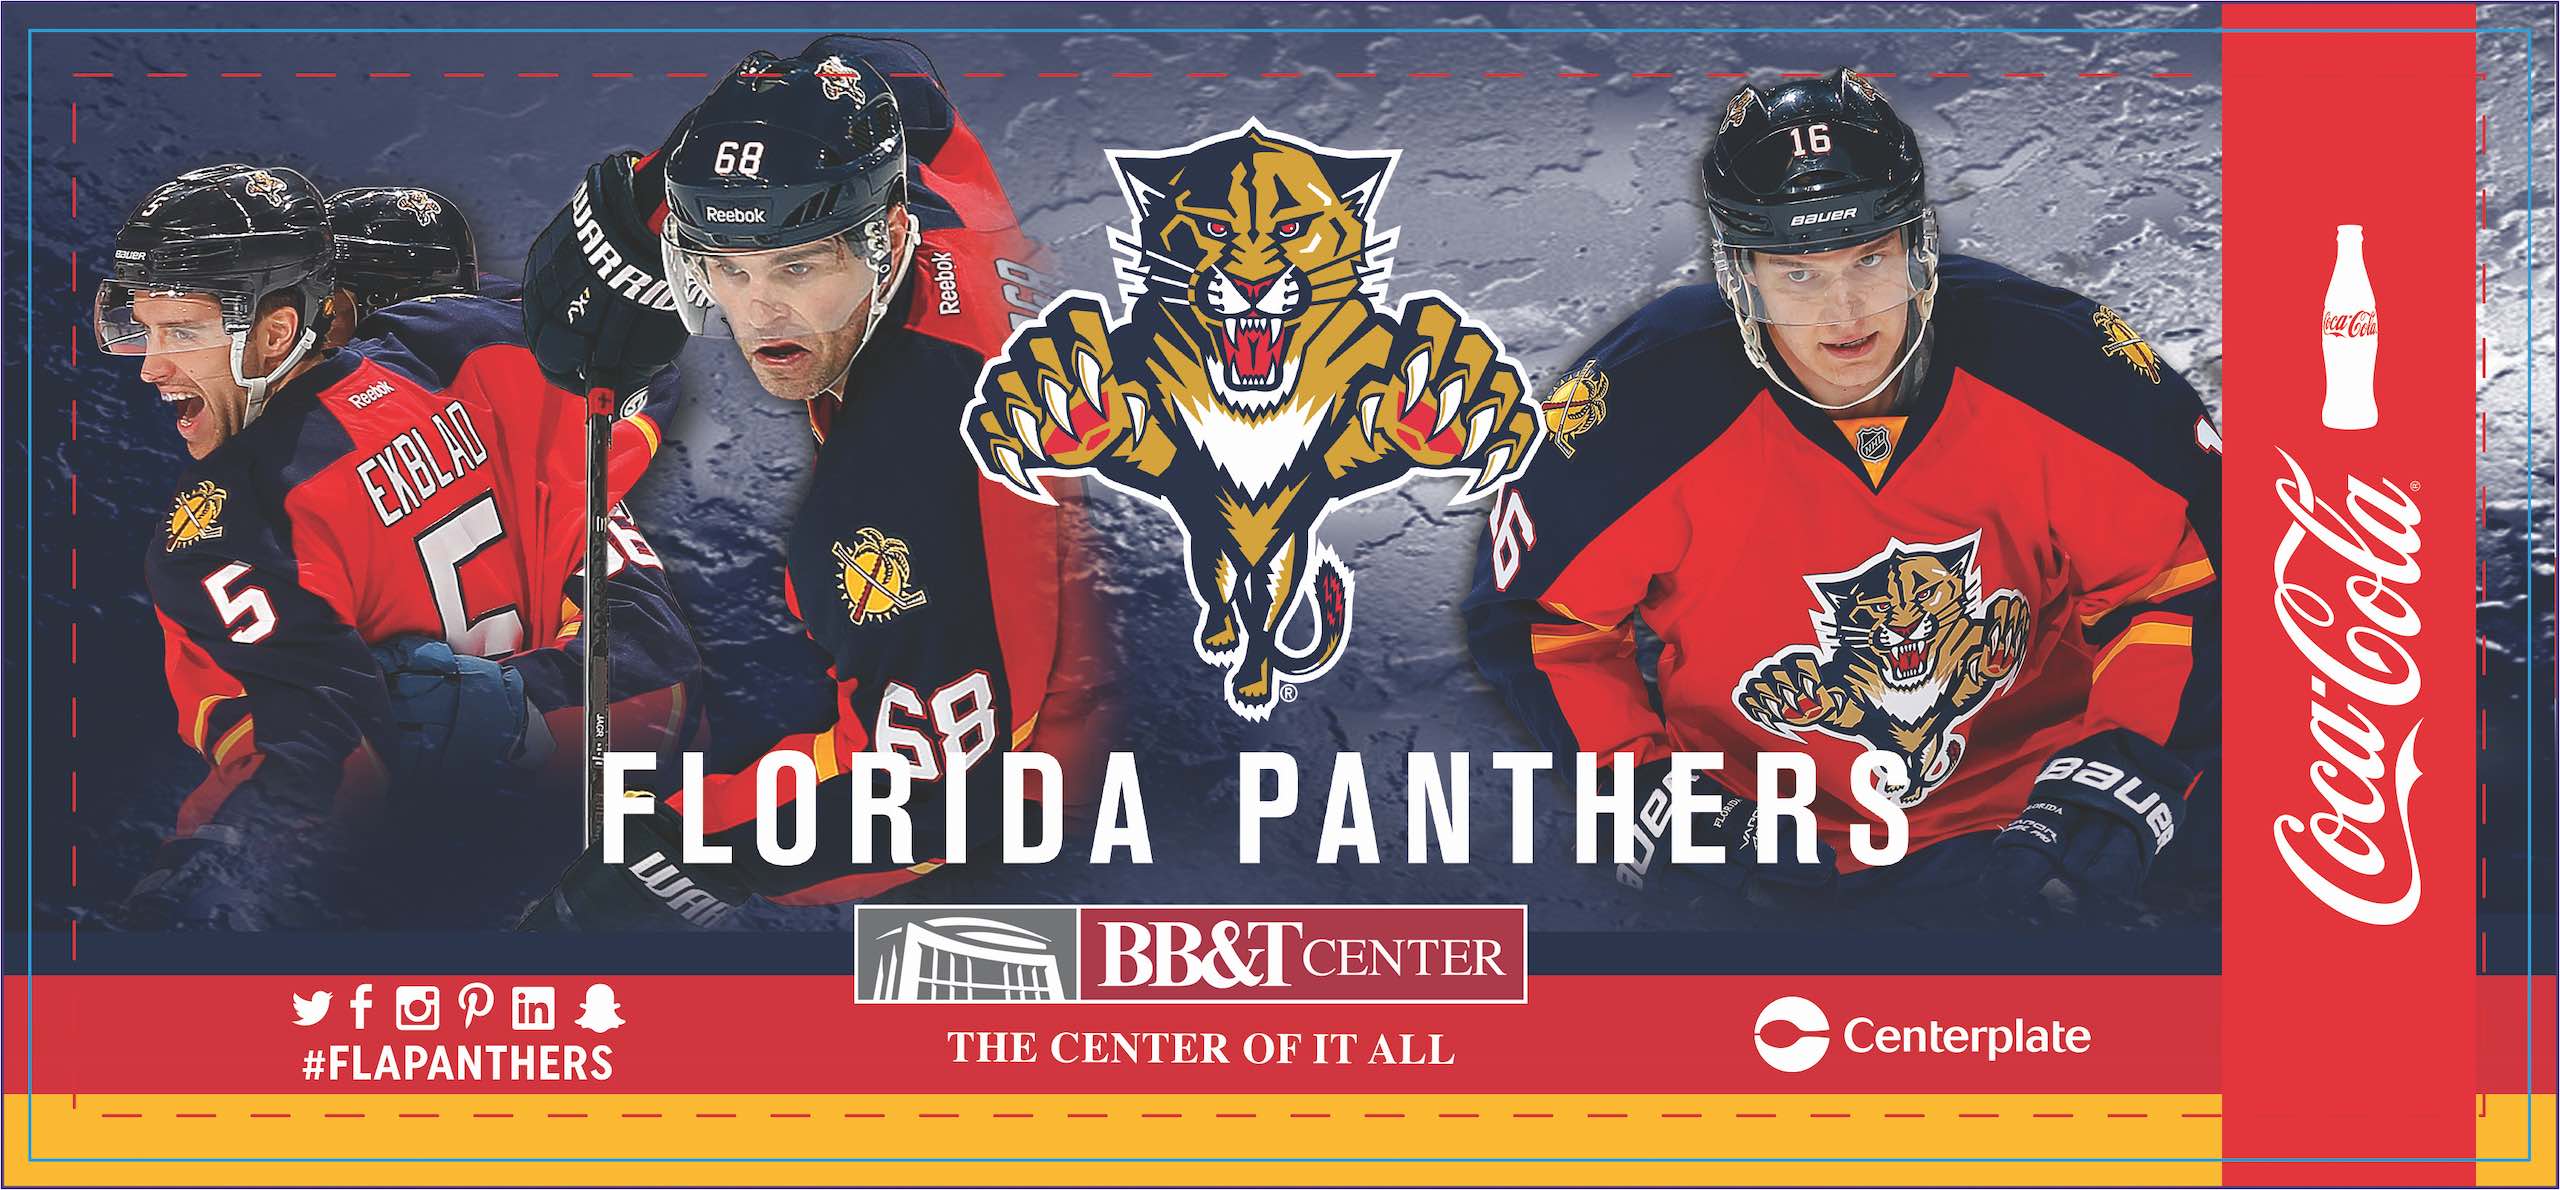 Arena Cup BB&T Center Ad